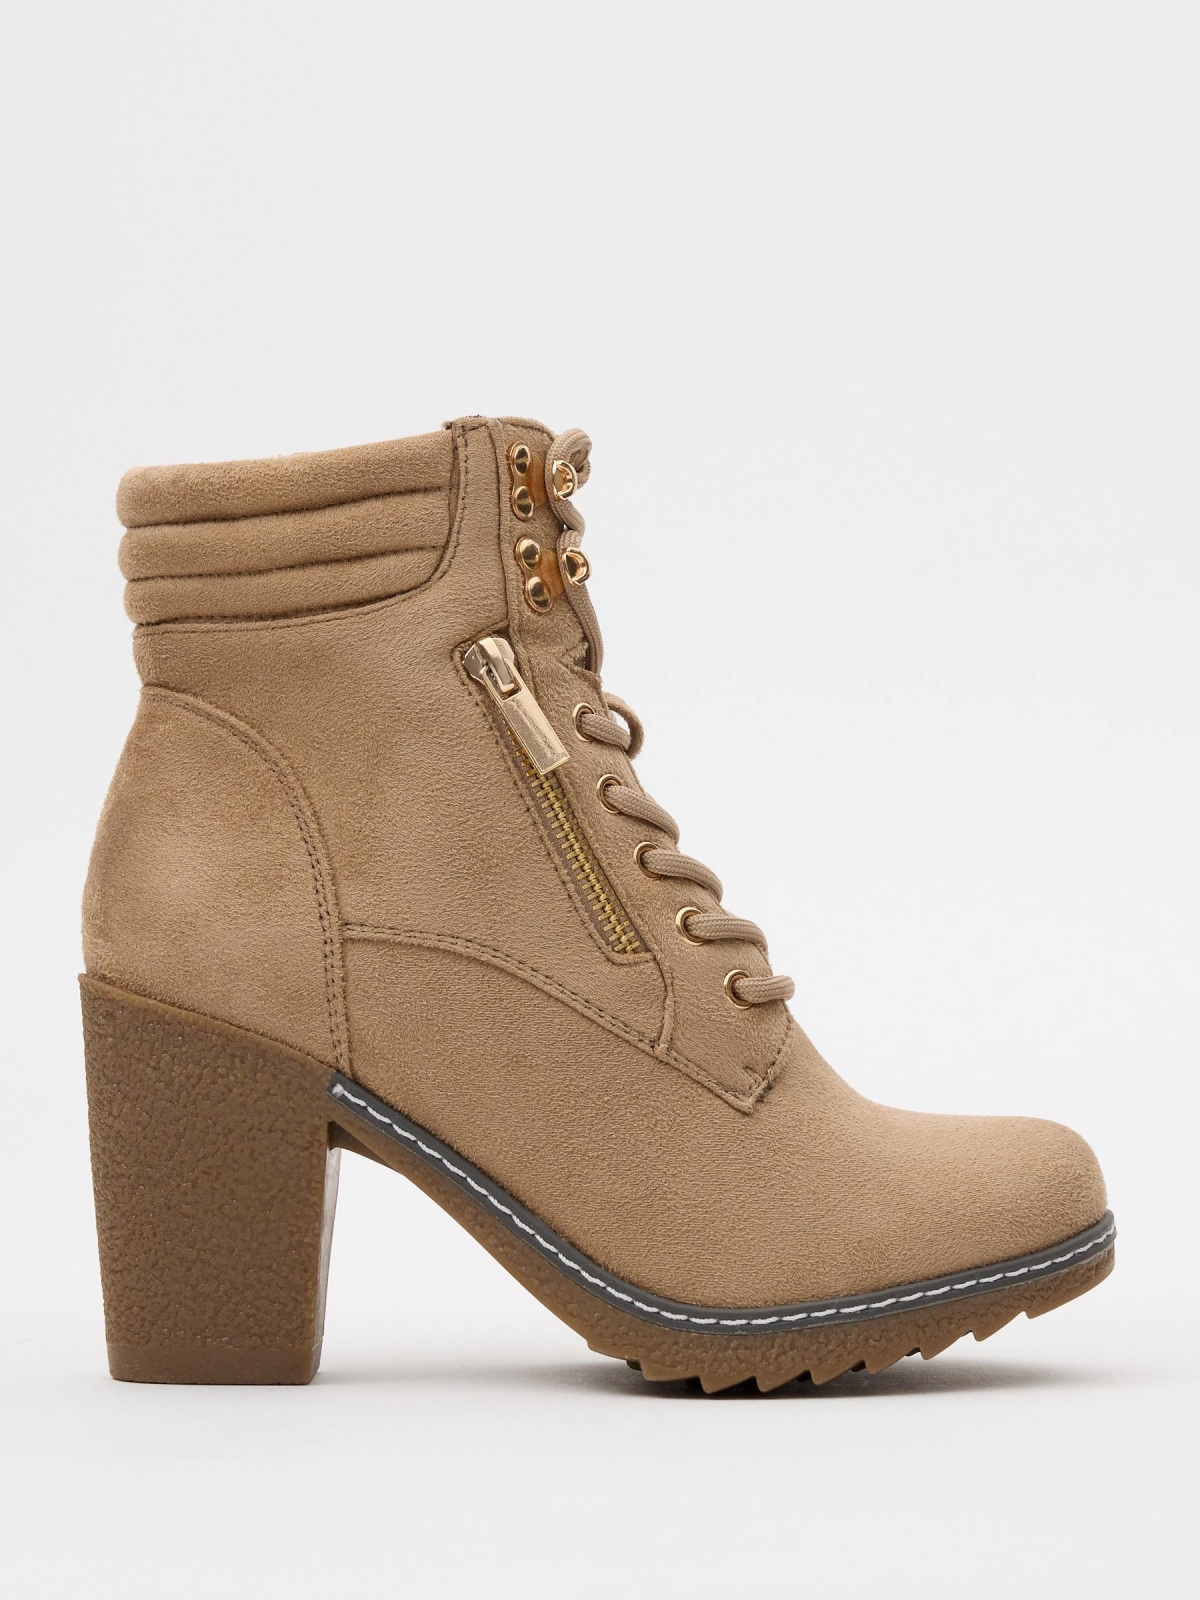 Ankle boots with collar and zipper